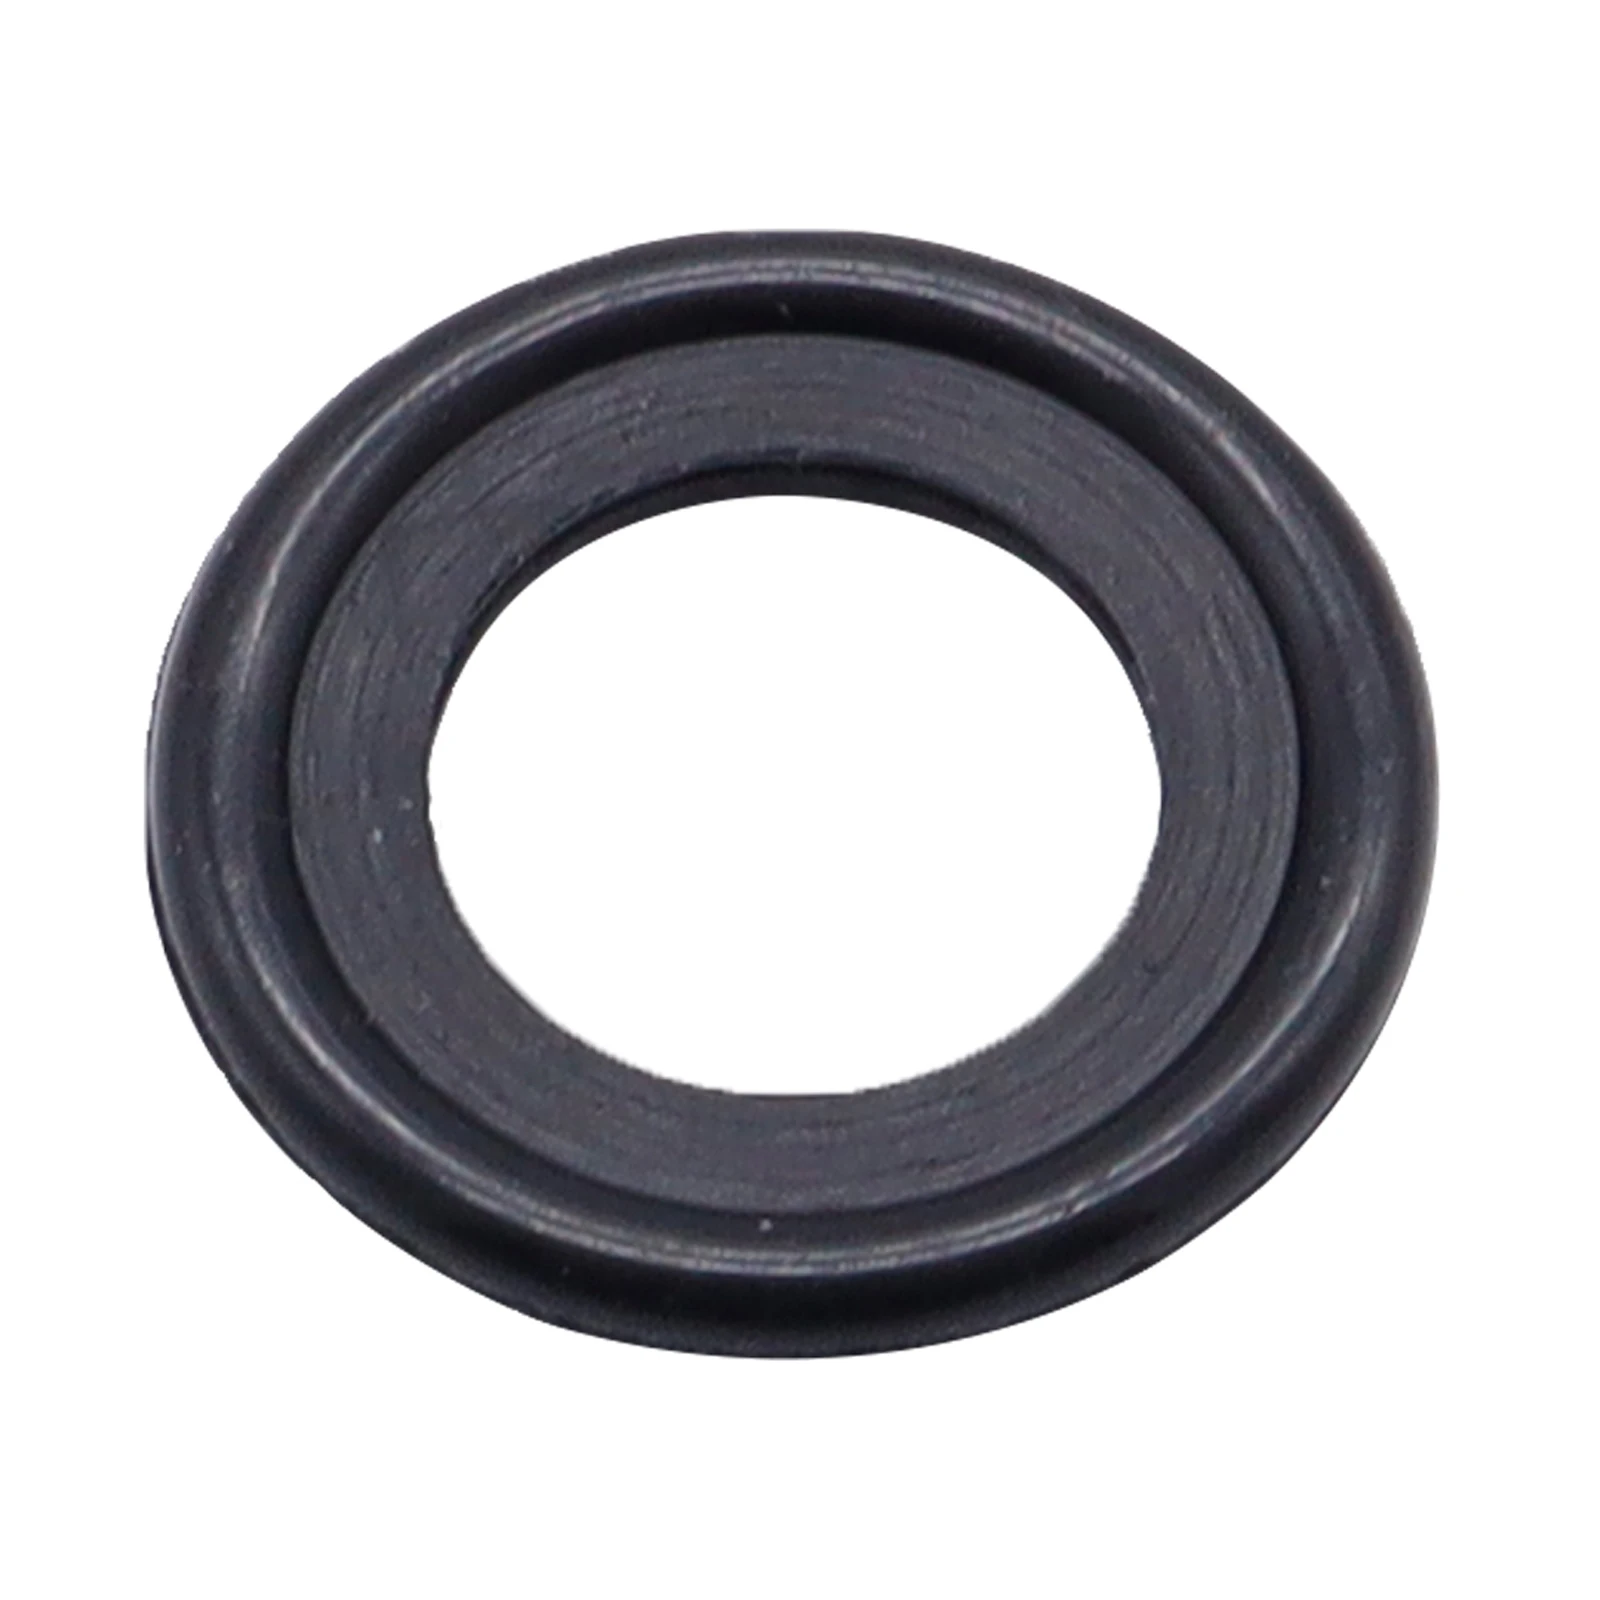 Erick's Wiper 10/20x Car Engine Thread Oil Drain Sump Plug Gaskets Washer Hole Seal Ring For Land Rover Ford Mazda Jaguar Volvo